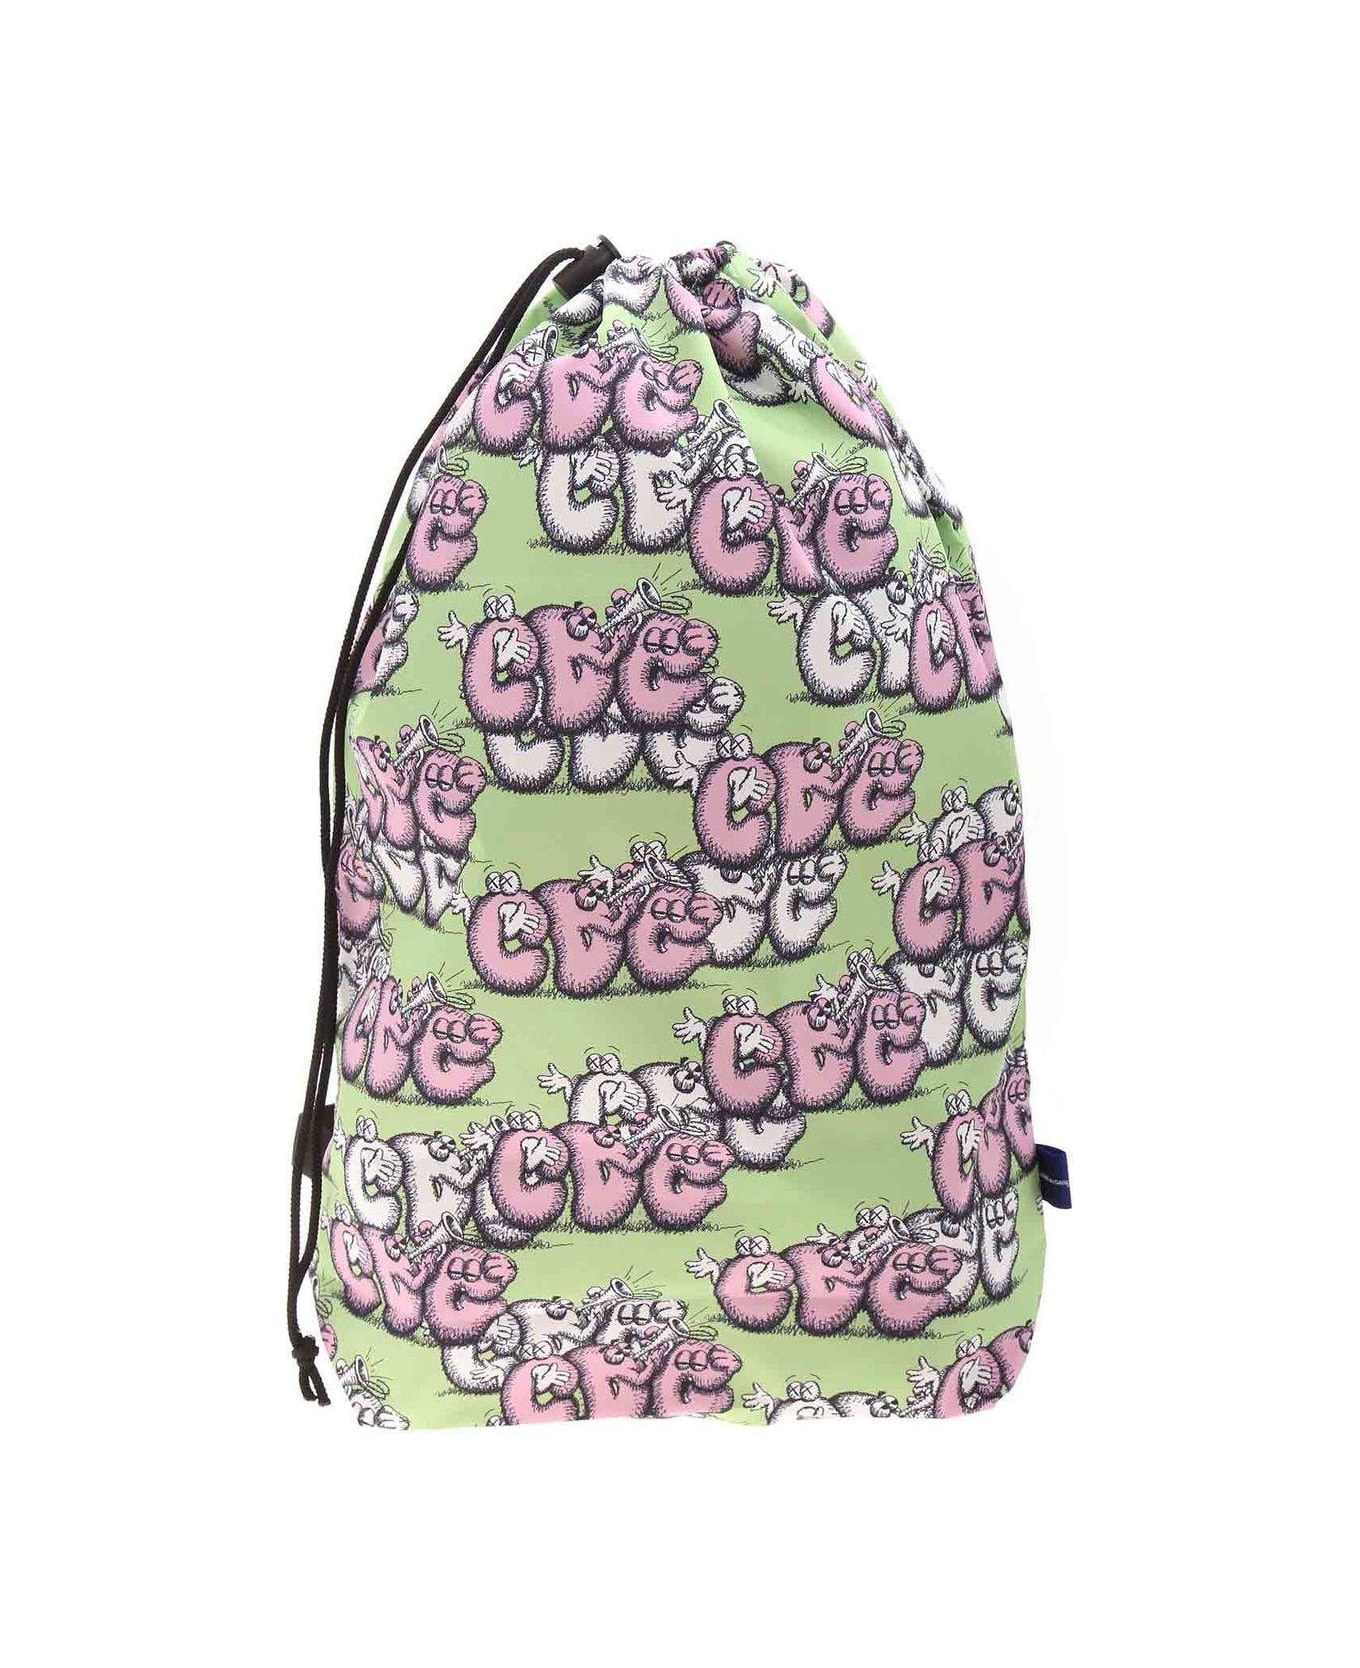 Comme des Garçons X Kaws Graphic Print Backpack - Green バックパック